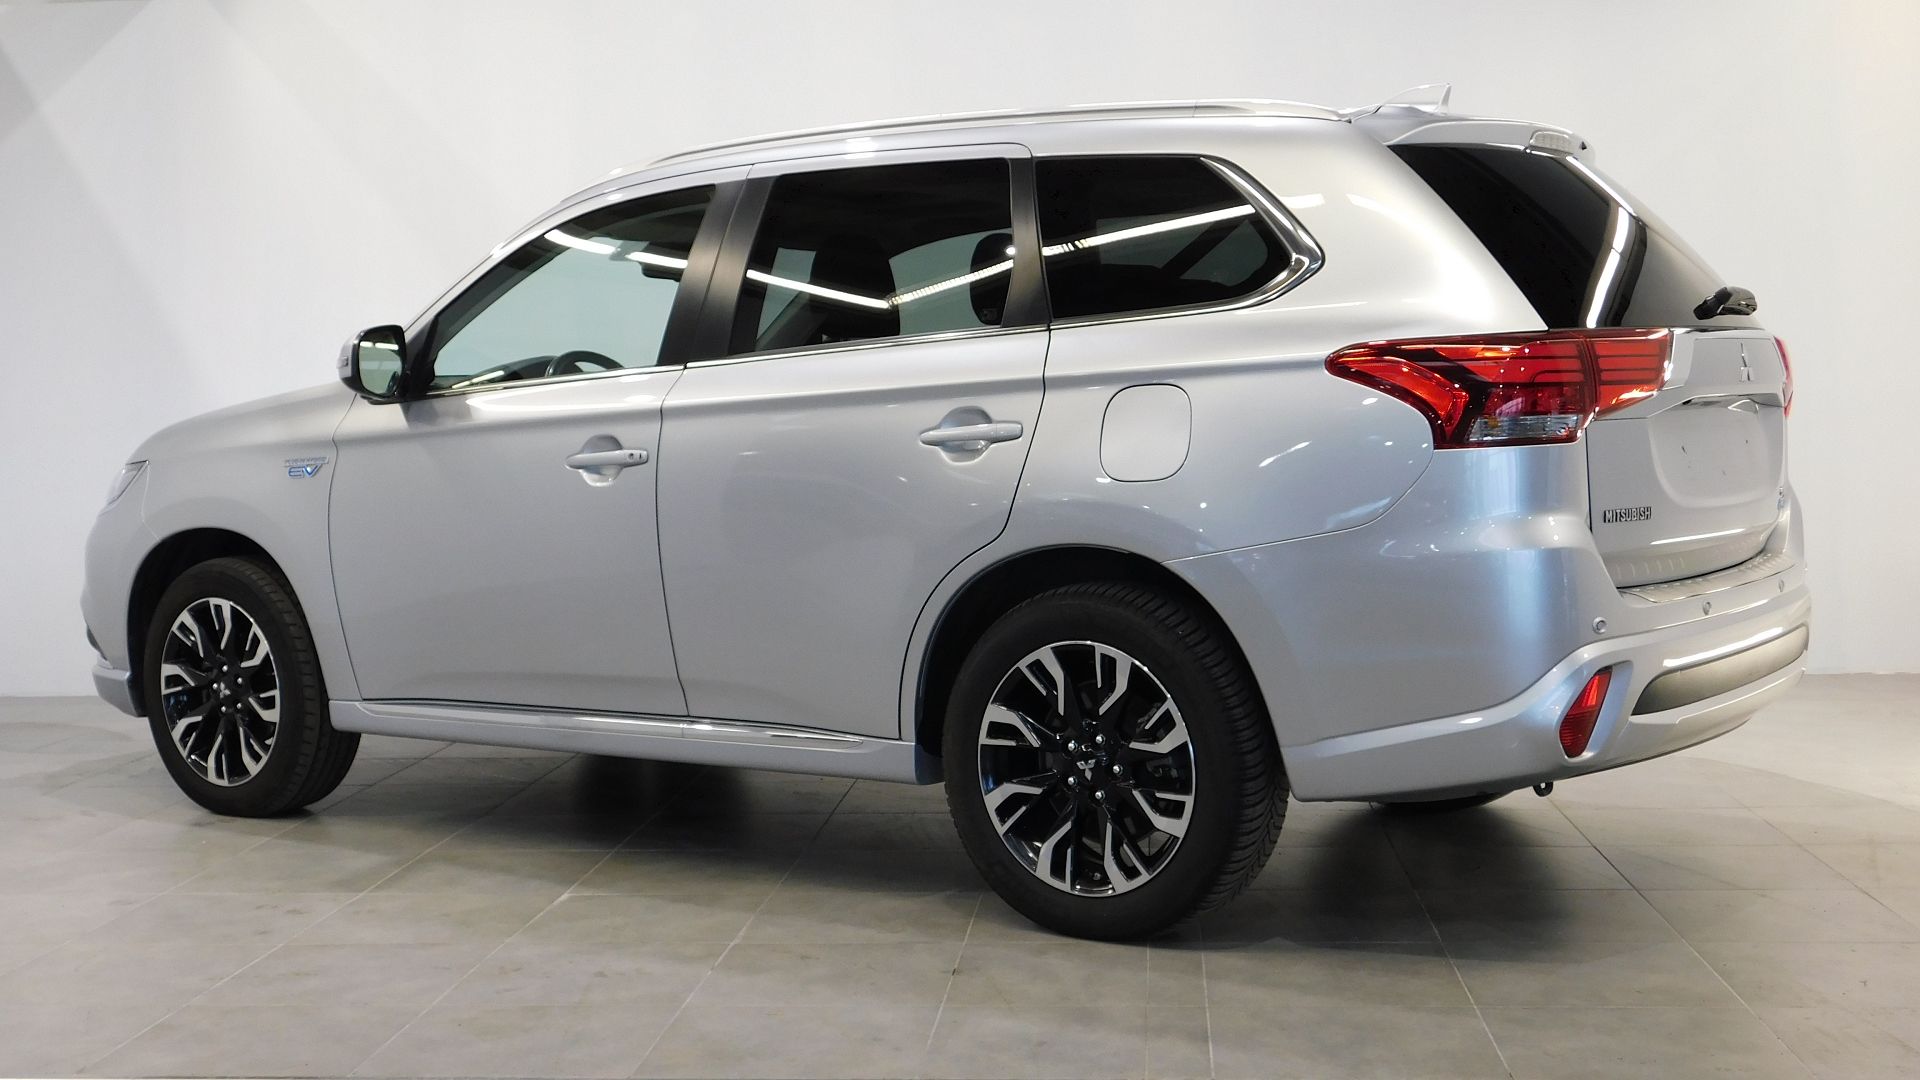 MITSUBISHI OUTLANDER PHEV HYBRIDE RECHARGEABLE INSTYLE